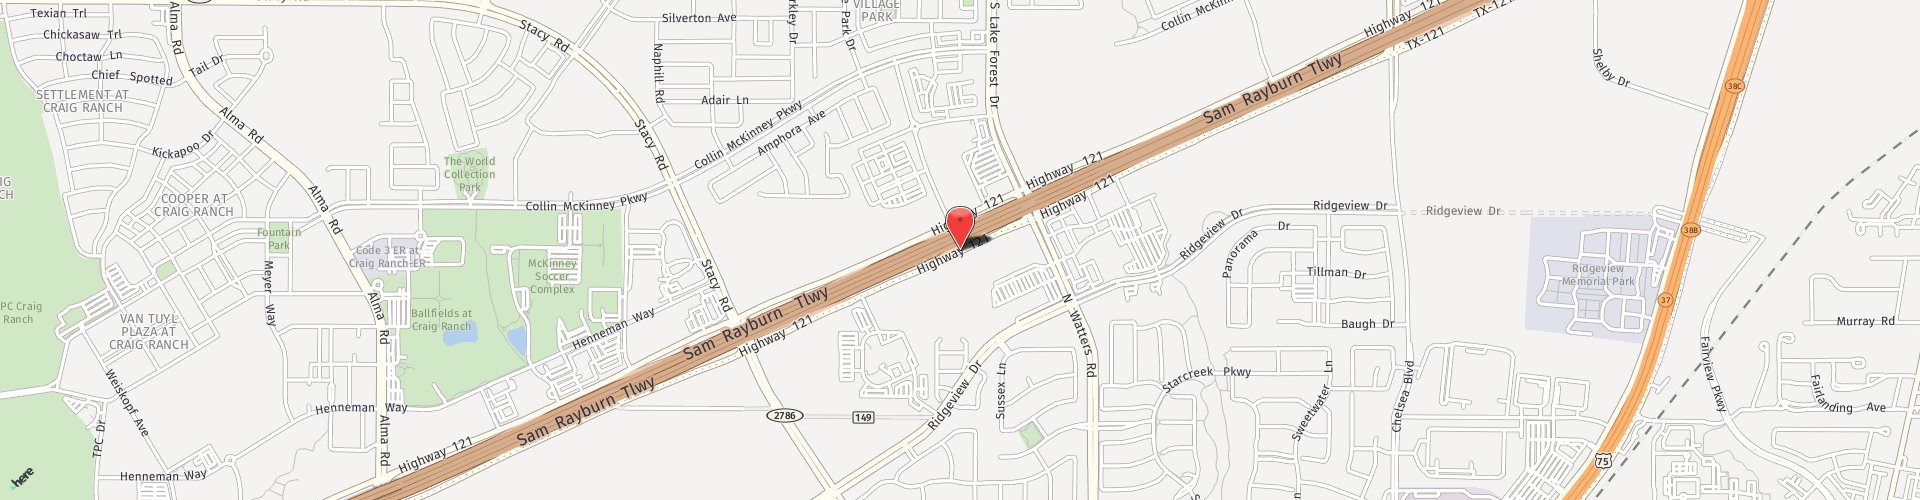 Location Map: 981 State Hwy 121 Allen, TX 75013